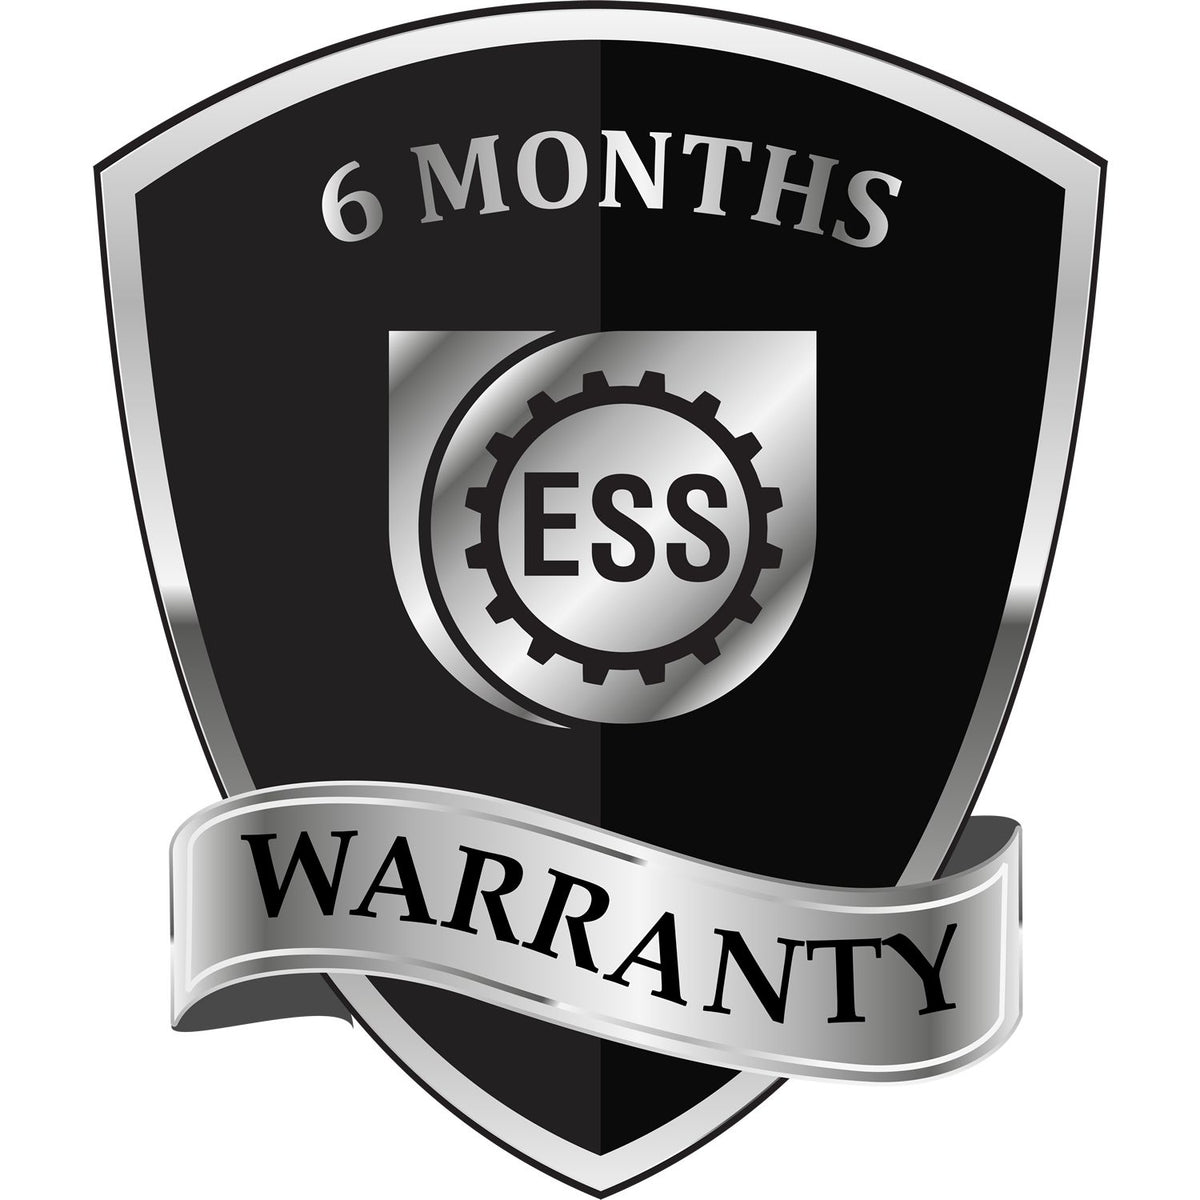 A badge or emblem showing a warranty icon for the Self-Inking Minnesota PE Stamp